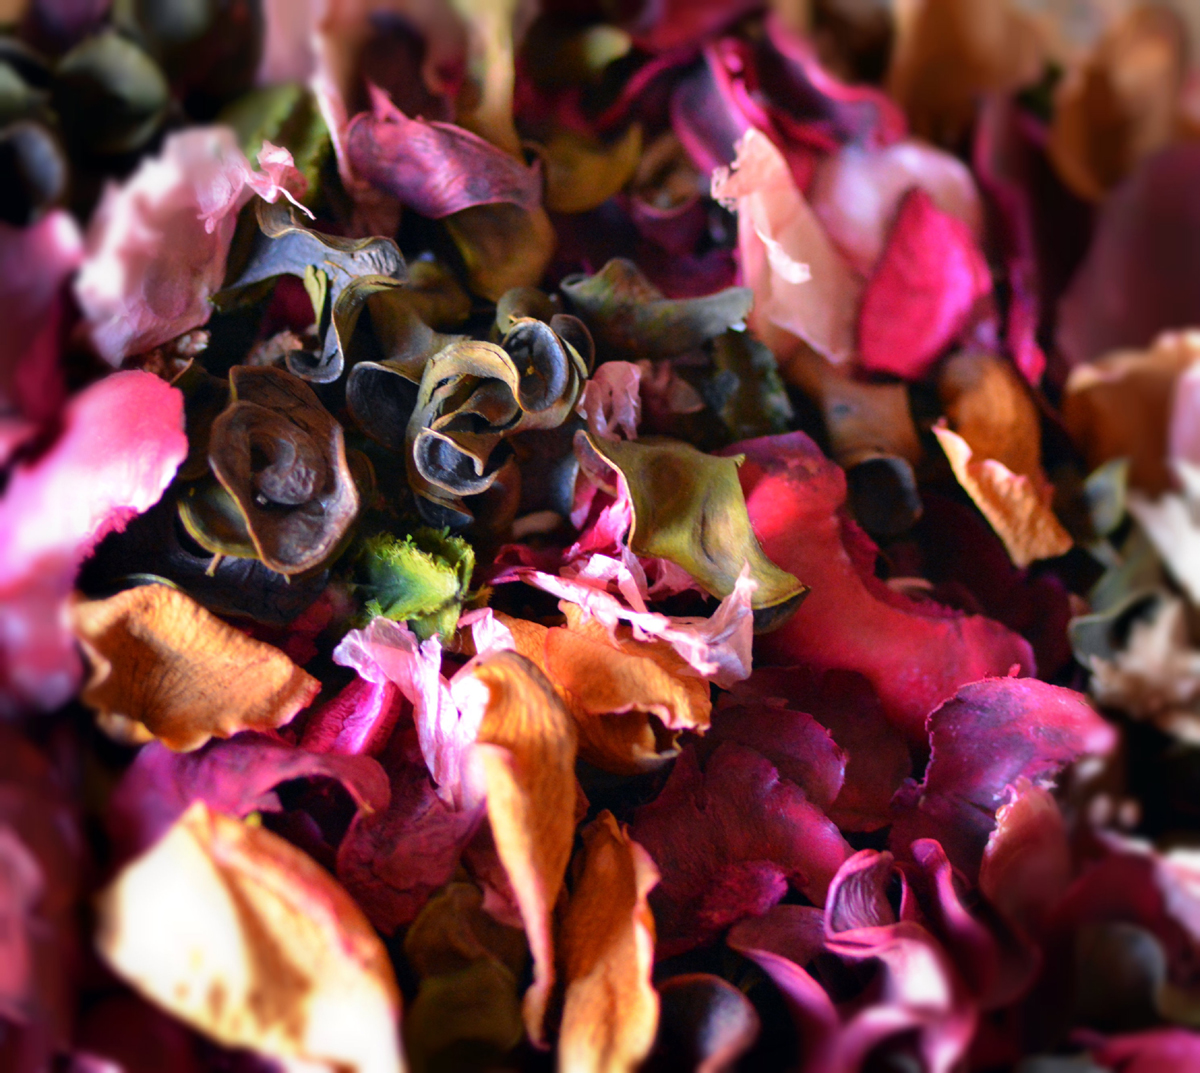 How to Make Potpourri – Instructions and Recipes